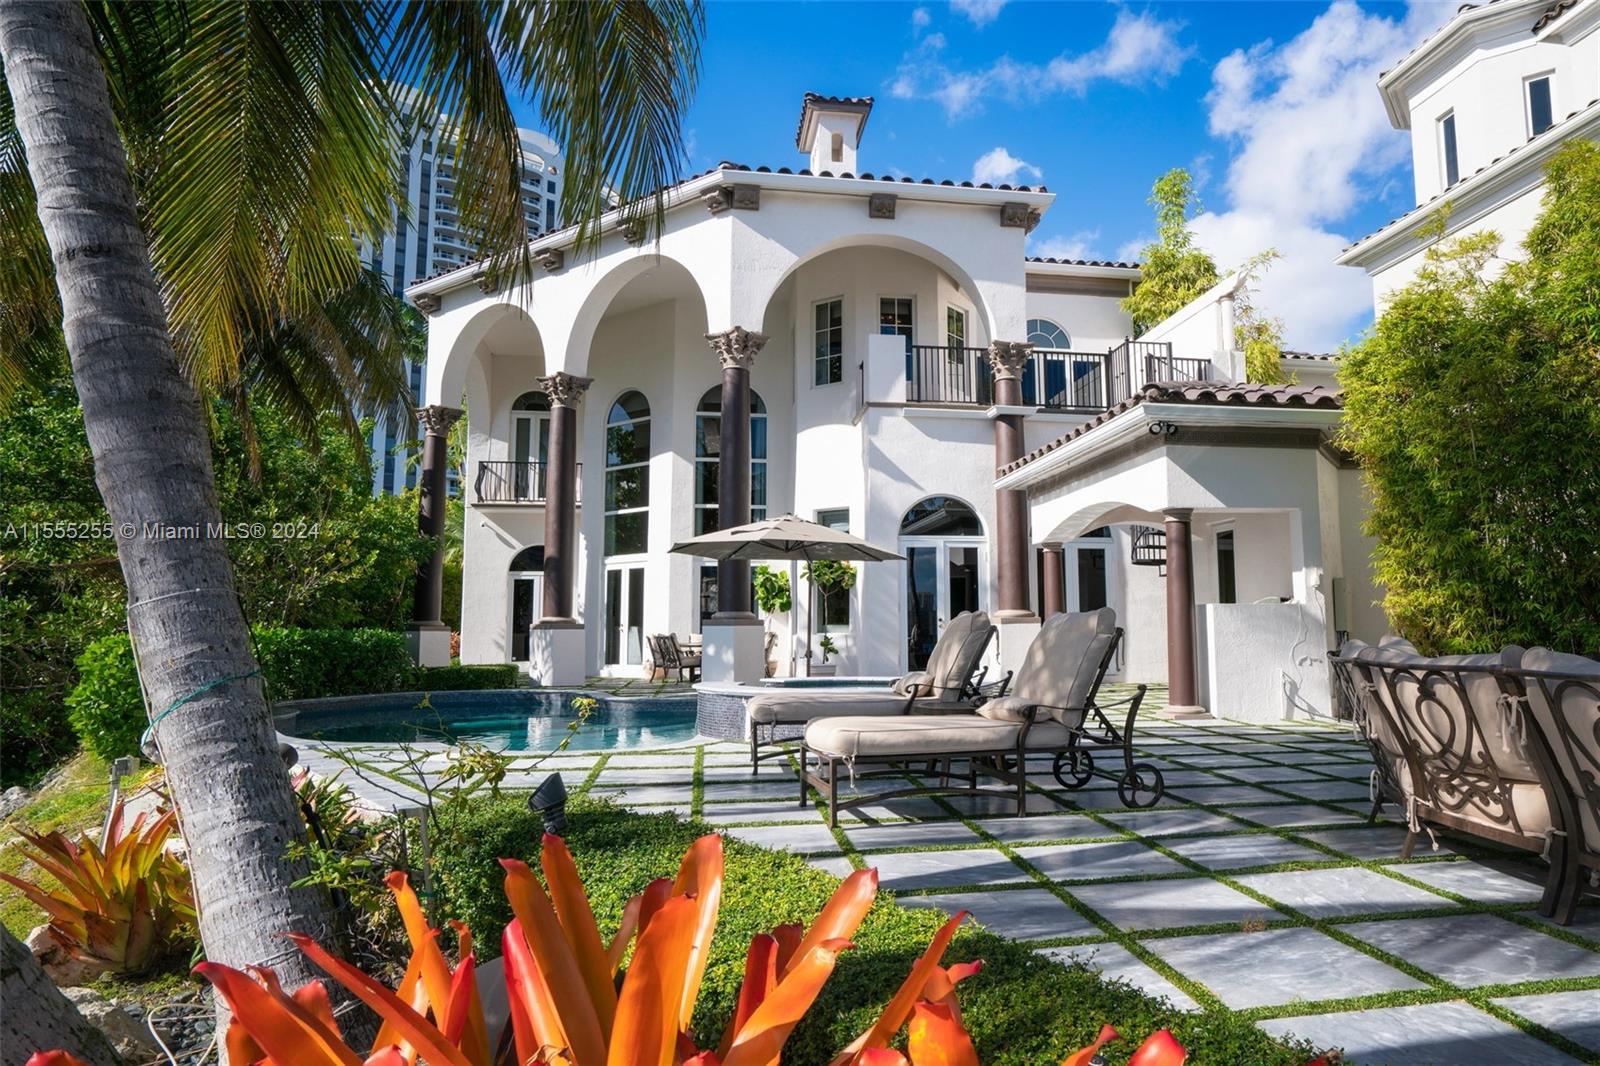 Own a former celebrity bayfront three-story Mediterranean estate in the prestigious gated community of Island Estates. The only home on a double lot of 24,772sf with 240ft of water frontage. Top-of-the-line finishes, vaulted 30-foot ceilings, gourmet chef's kitchen, elevator, luxurious master suite with sitting area and veranda with sunrises and sunset panoramic views. Stunning tropical pool and spa overlooking the bay. Marble and walnut hardwood floors, impact glass, 50ft boat docks with electricity and water. Ipad-controlled smart house system, movie theater with 128-inch TV, cabana, elevator, office, service quarters, and golf cart parking. and 14K Gold Chandeliers with Swarovski Crystals with a special cleaning system. Residents have complete access to Prive five-star amenities.